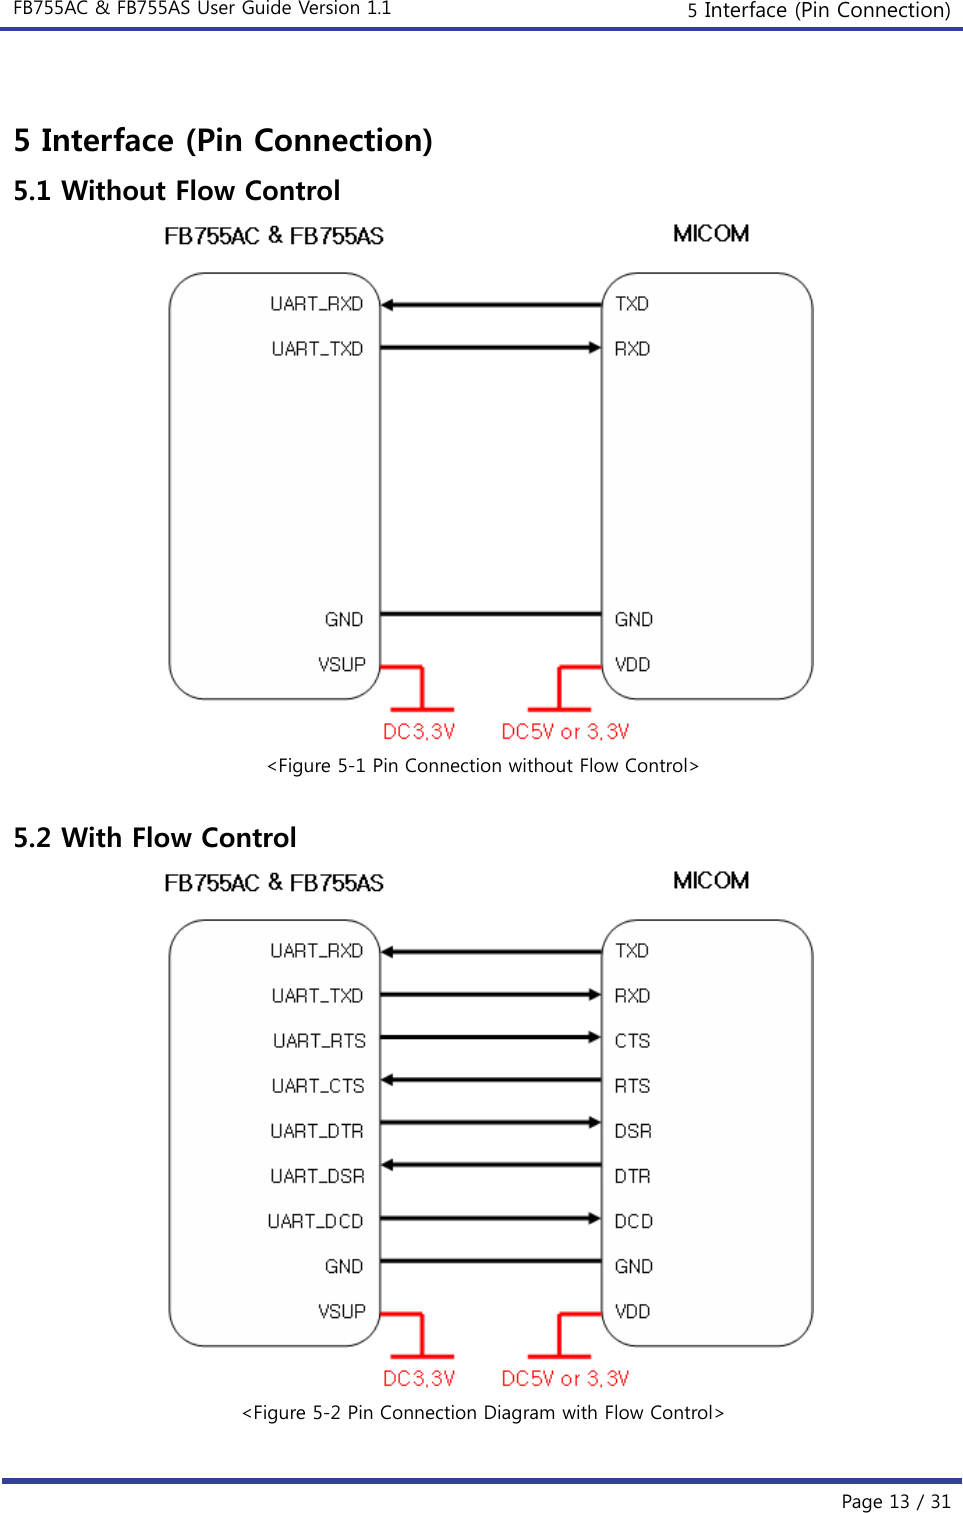 FB755AC &amp; FB755AS User Guide Version 1.1  5 Interface (Pin Connection)  Page 13 / 31  5 Interface (Pin Connection) 5.1 Without Flow Control  &lt;Figure 5-1 Pin Connection without Flow Control&gt;  5.2 With Flow Control  &lt;Figure 5-2 Pin Connection Diagram with Flow Control&gt; 